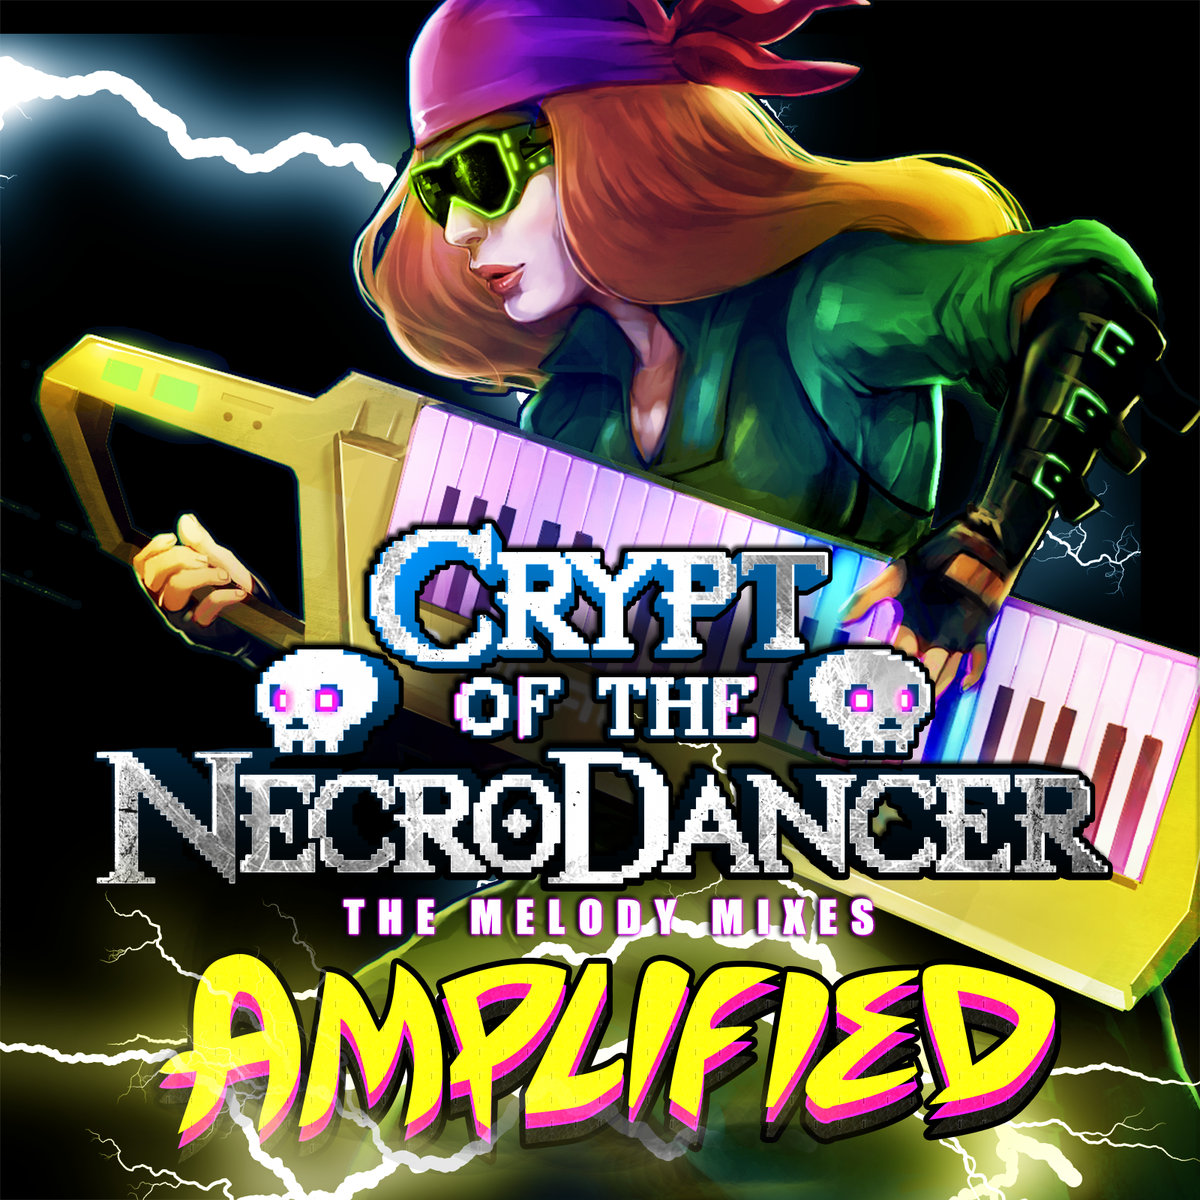 Amplify this melodie текст. Crypt of the NECRODANCER. Crypt of the NECRODANCER OST. Crypt of the NECRODANCER обложка. A hat in time и Crypt of the NECRODANCER..